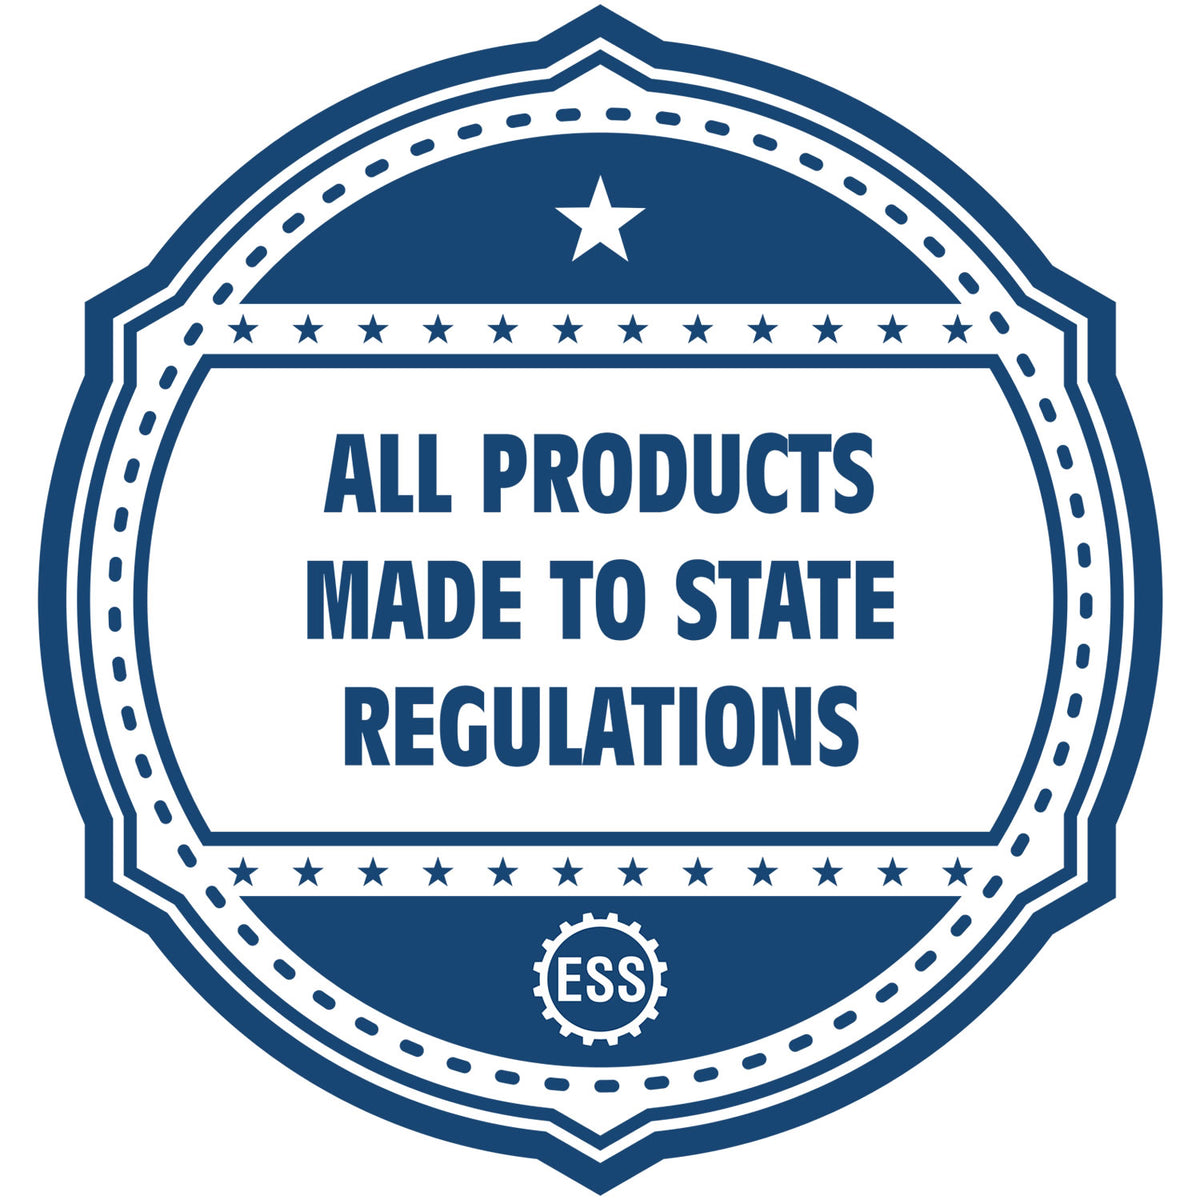 An icon or badge element for the Extended Long Reach Colorado Architect Seal Embosser showing that this product is made in compliance with state regulations.